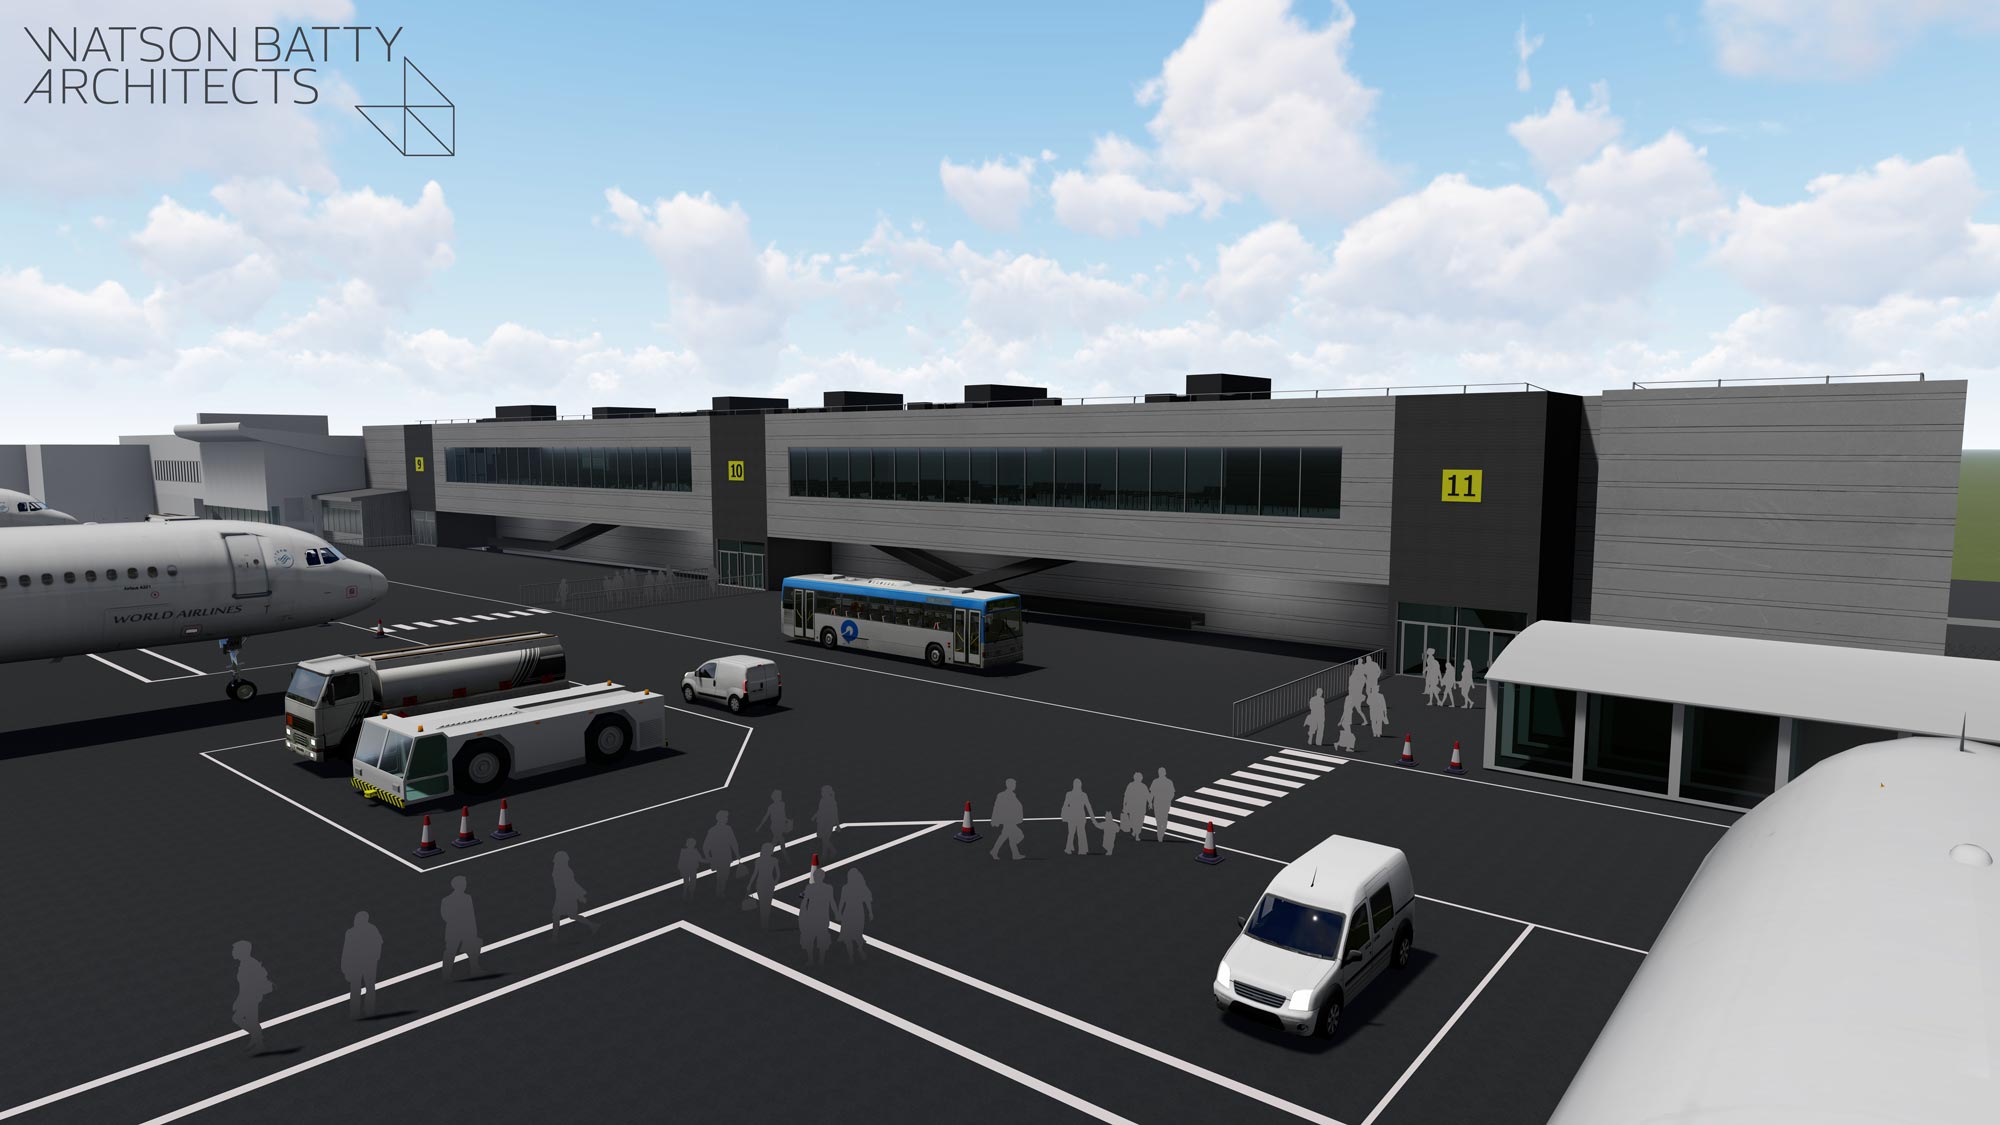 Plans for a major extension to the main airport terminal building at Leeds Bradford Airport (LBA) have been approved by Leeds City Council.